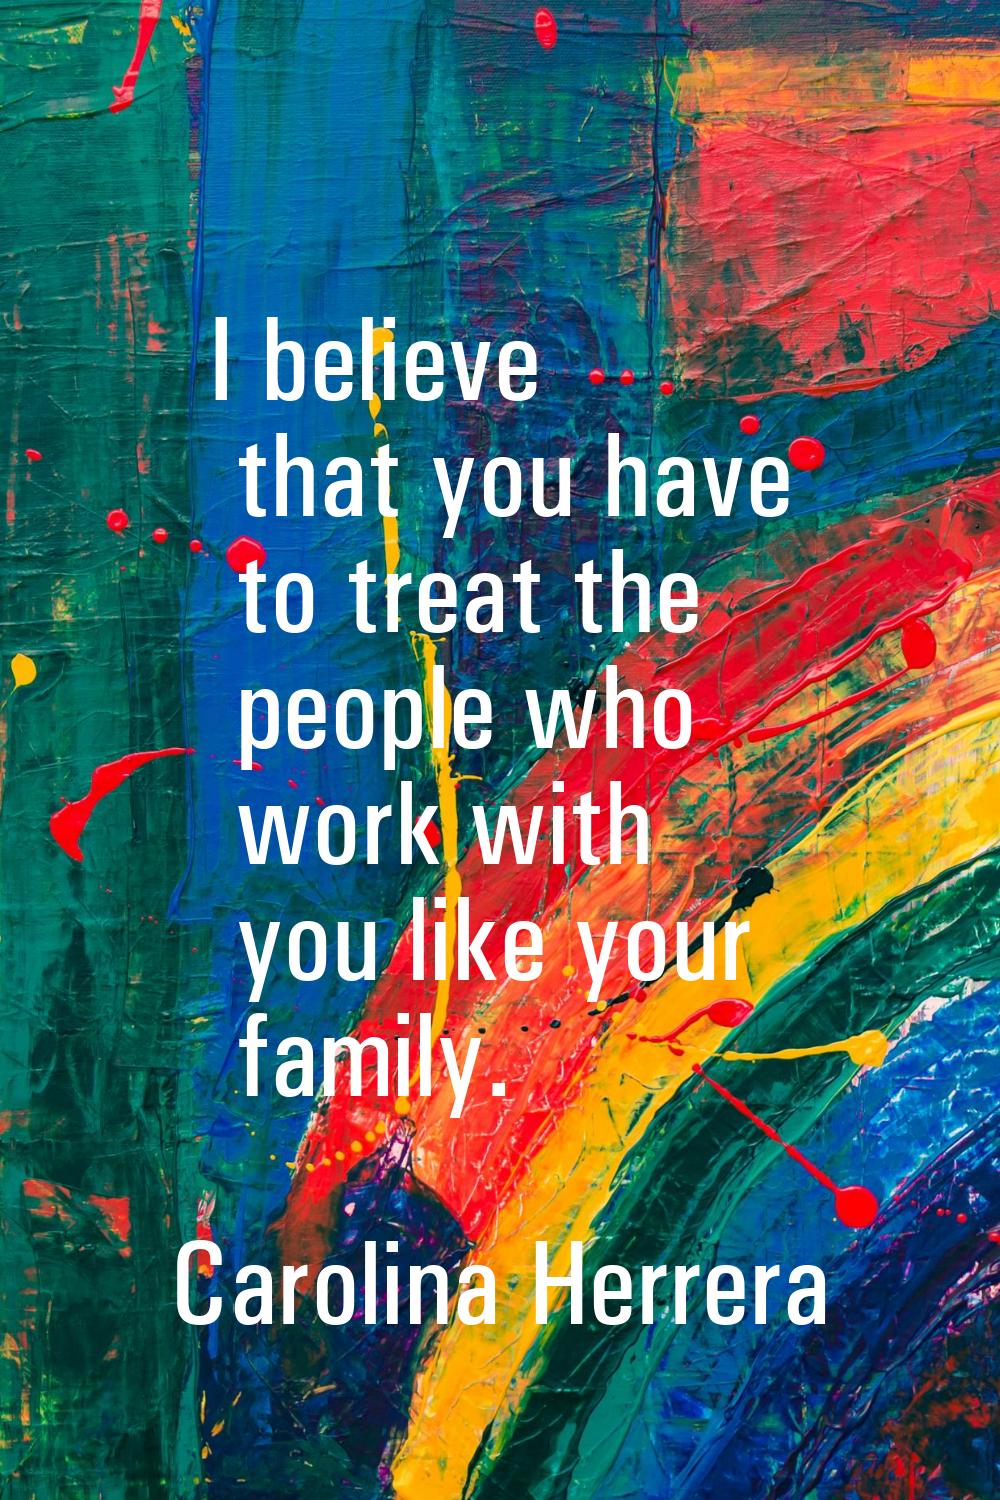 I believe that you have to treat the people who work with you like your family.